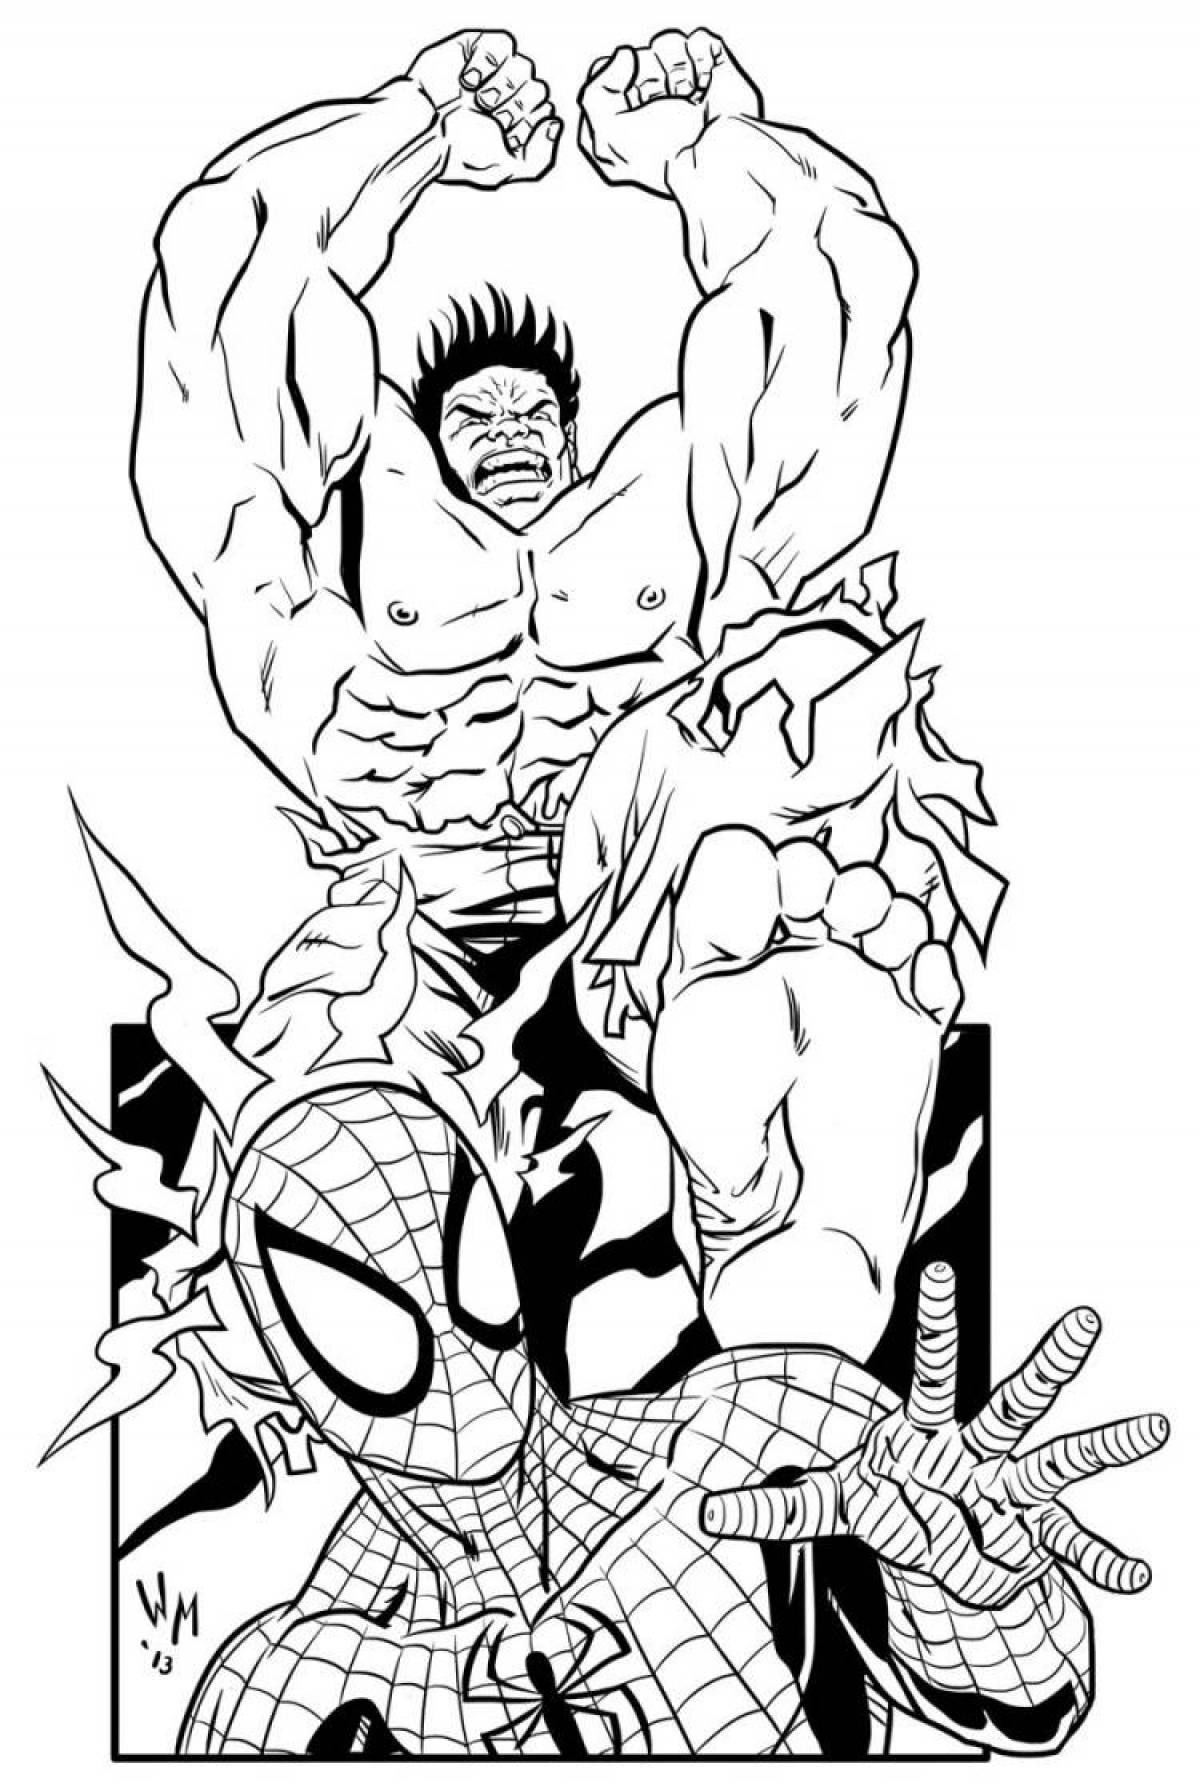 Adorable Hulk and Spiderman coloring page